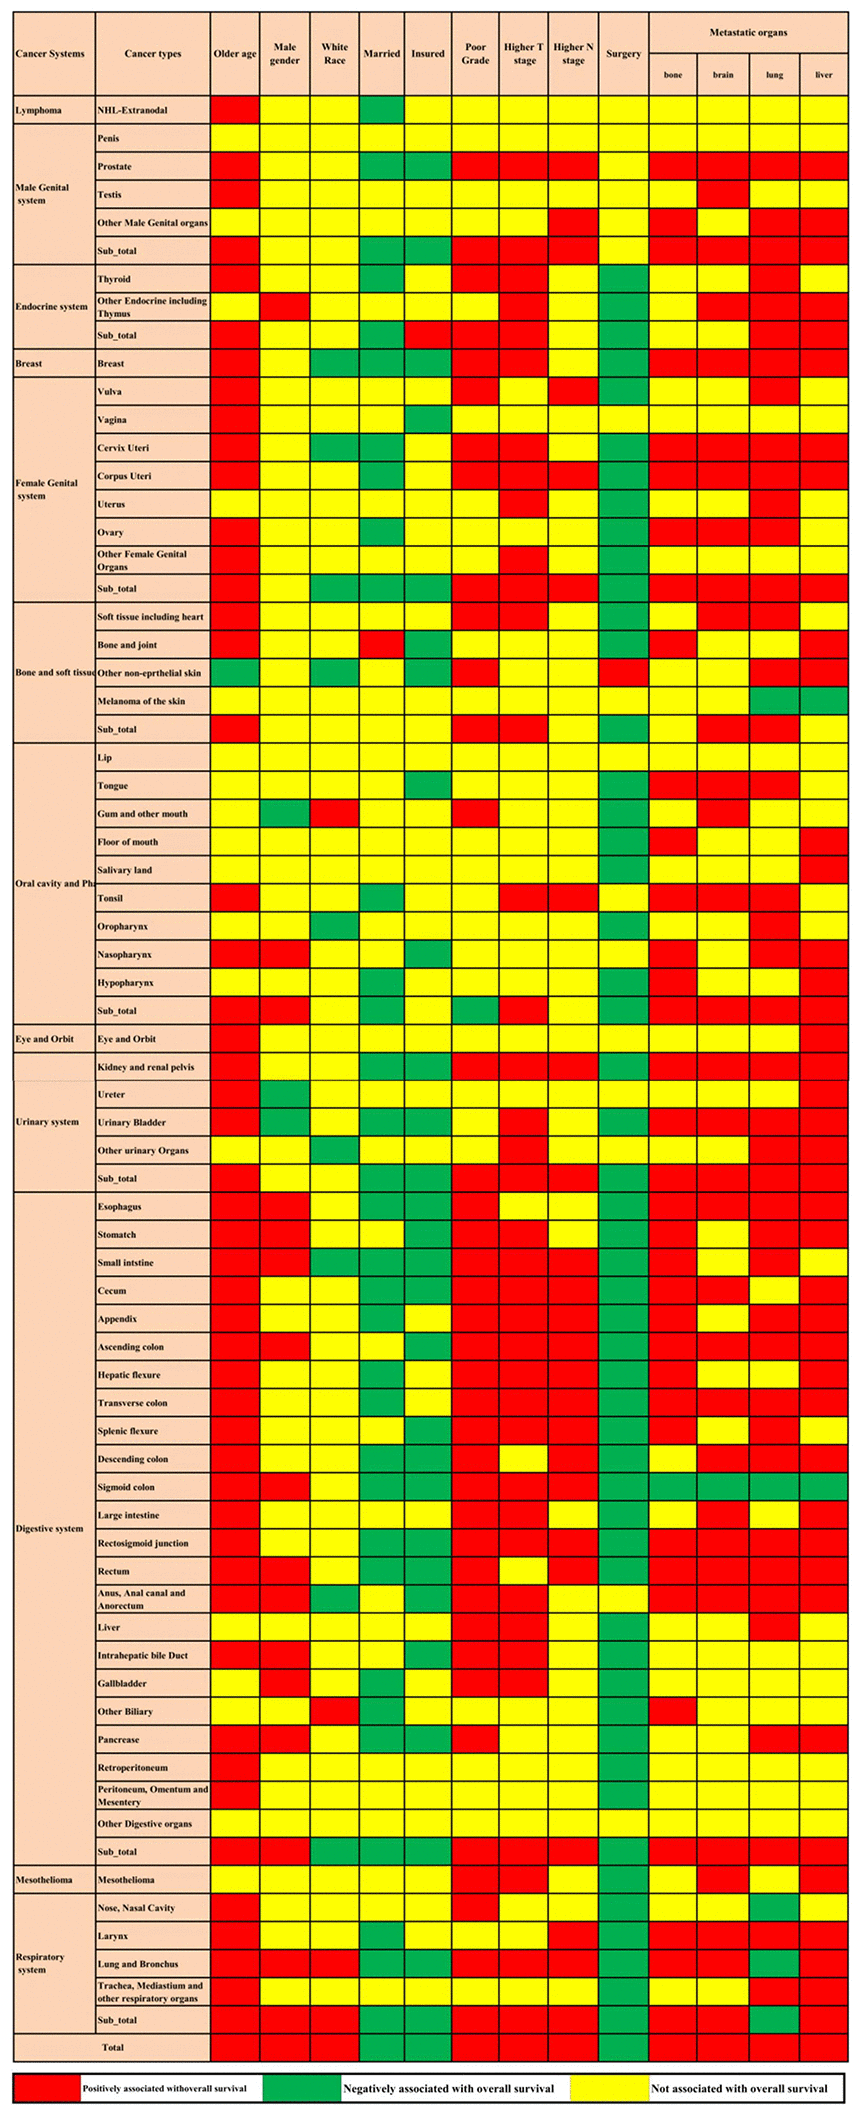 Prognostic factors for the 61 metastatic cancer types in the construction cohort. The red colour and green colour describe risk factors and protective factors for the survival of metastatic cancers, respectively, while the yellow colour indicates that the factor did not reach the significance level.